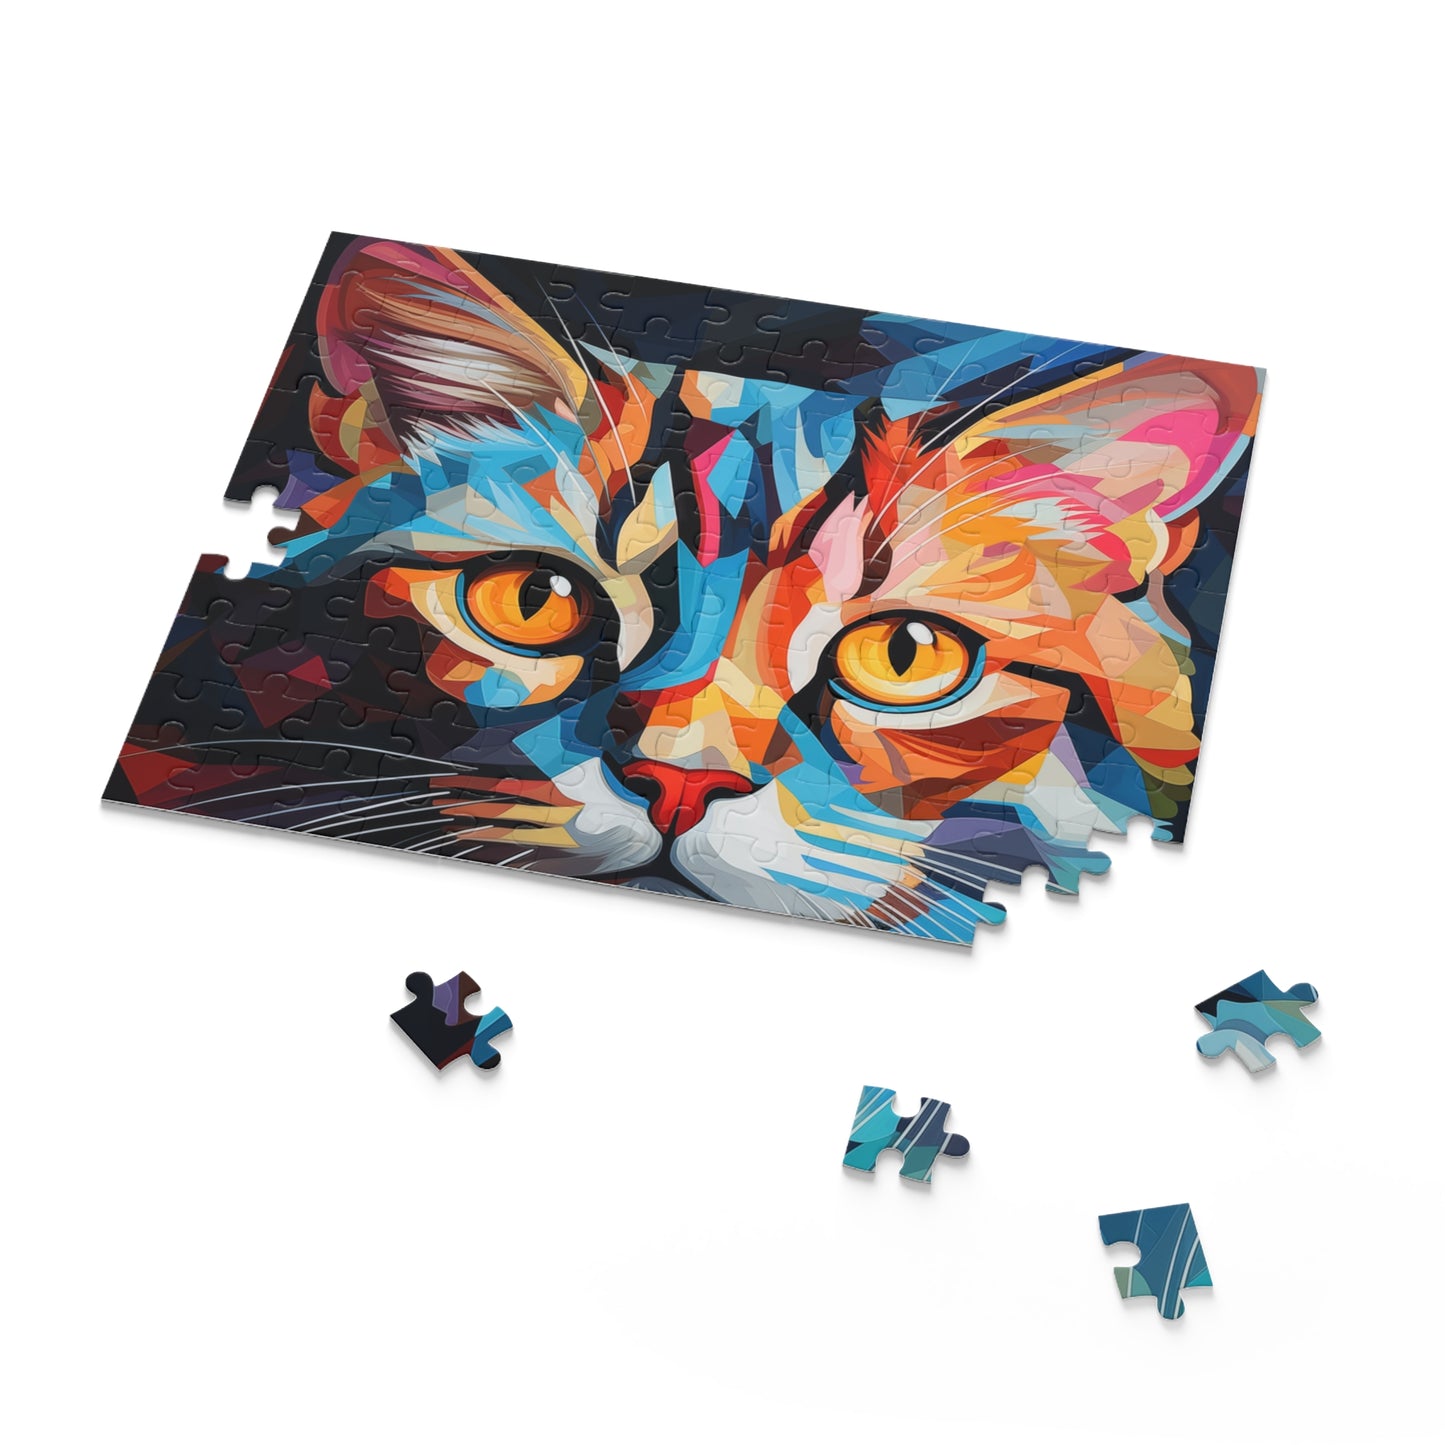 Abstract Oil Paint Colorful Cat Jigsaw Puzzle Adult Birthday Business Jigsaw Puzzle Gift for Him Funny Humorous Indoor Outdoor Game Gift For Her Online-7